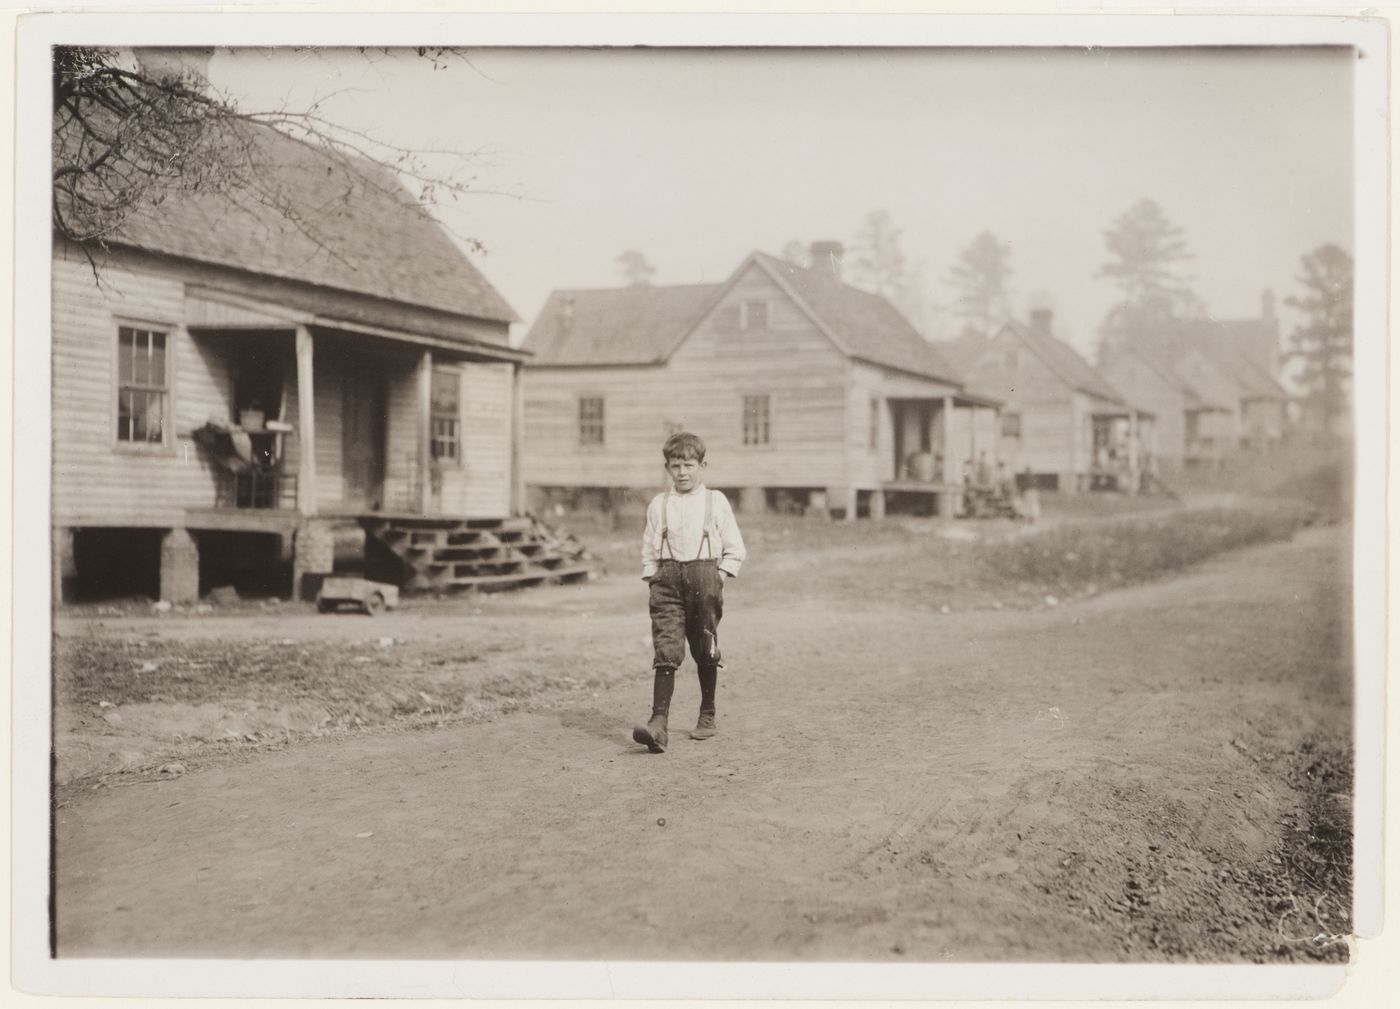 Photograph of Louis Stokes, one of the young workers in the Kosciusko Cotton Mills, walking along street with wooden houses, Kosciusko, Mississippi, United States